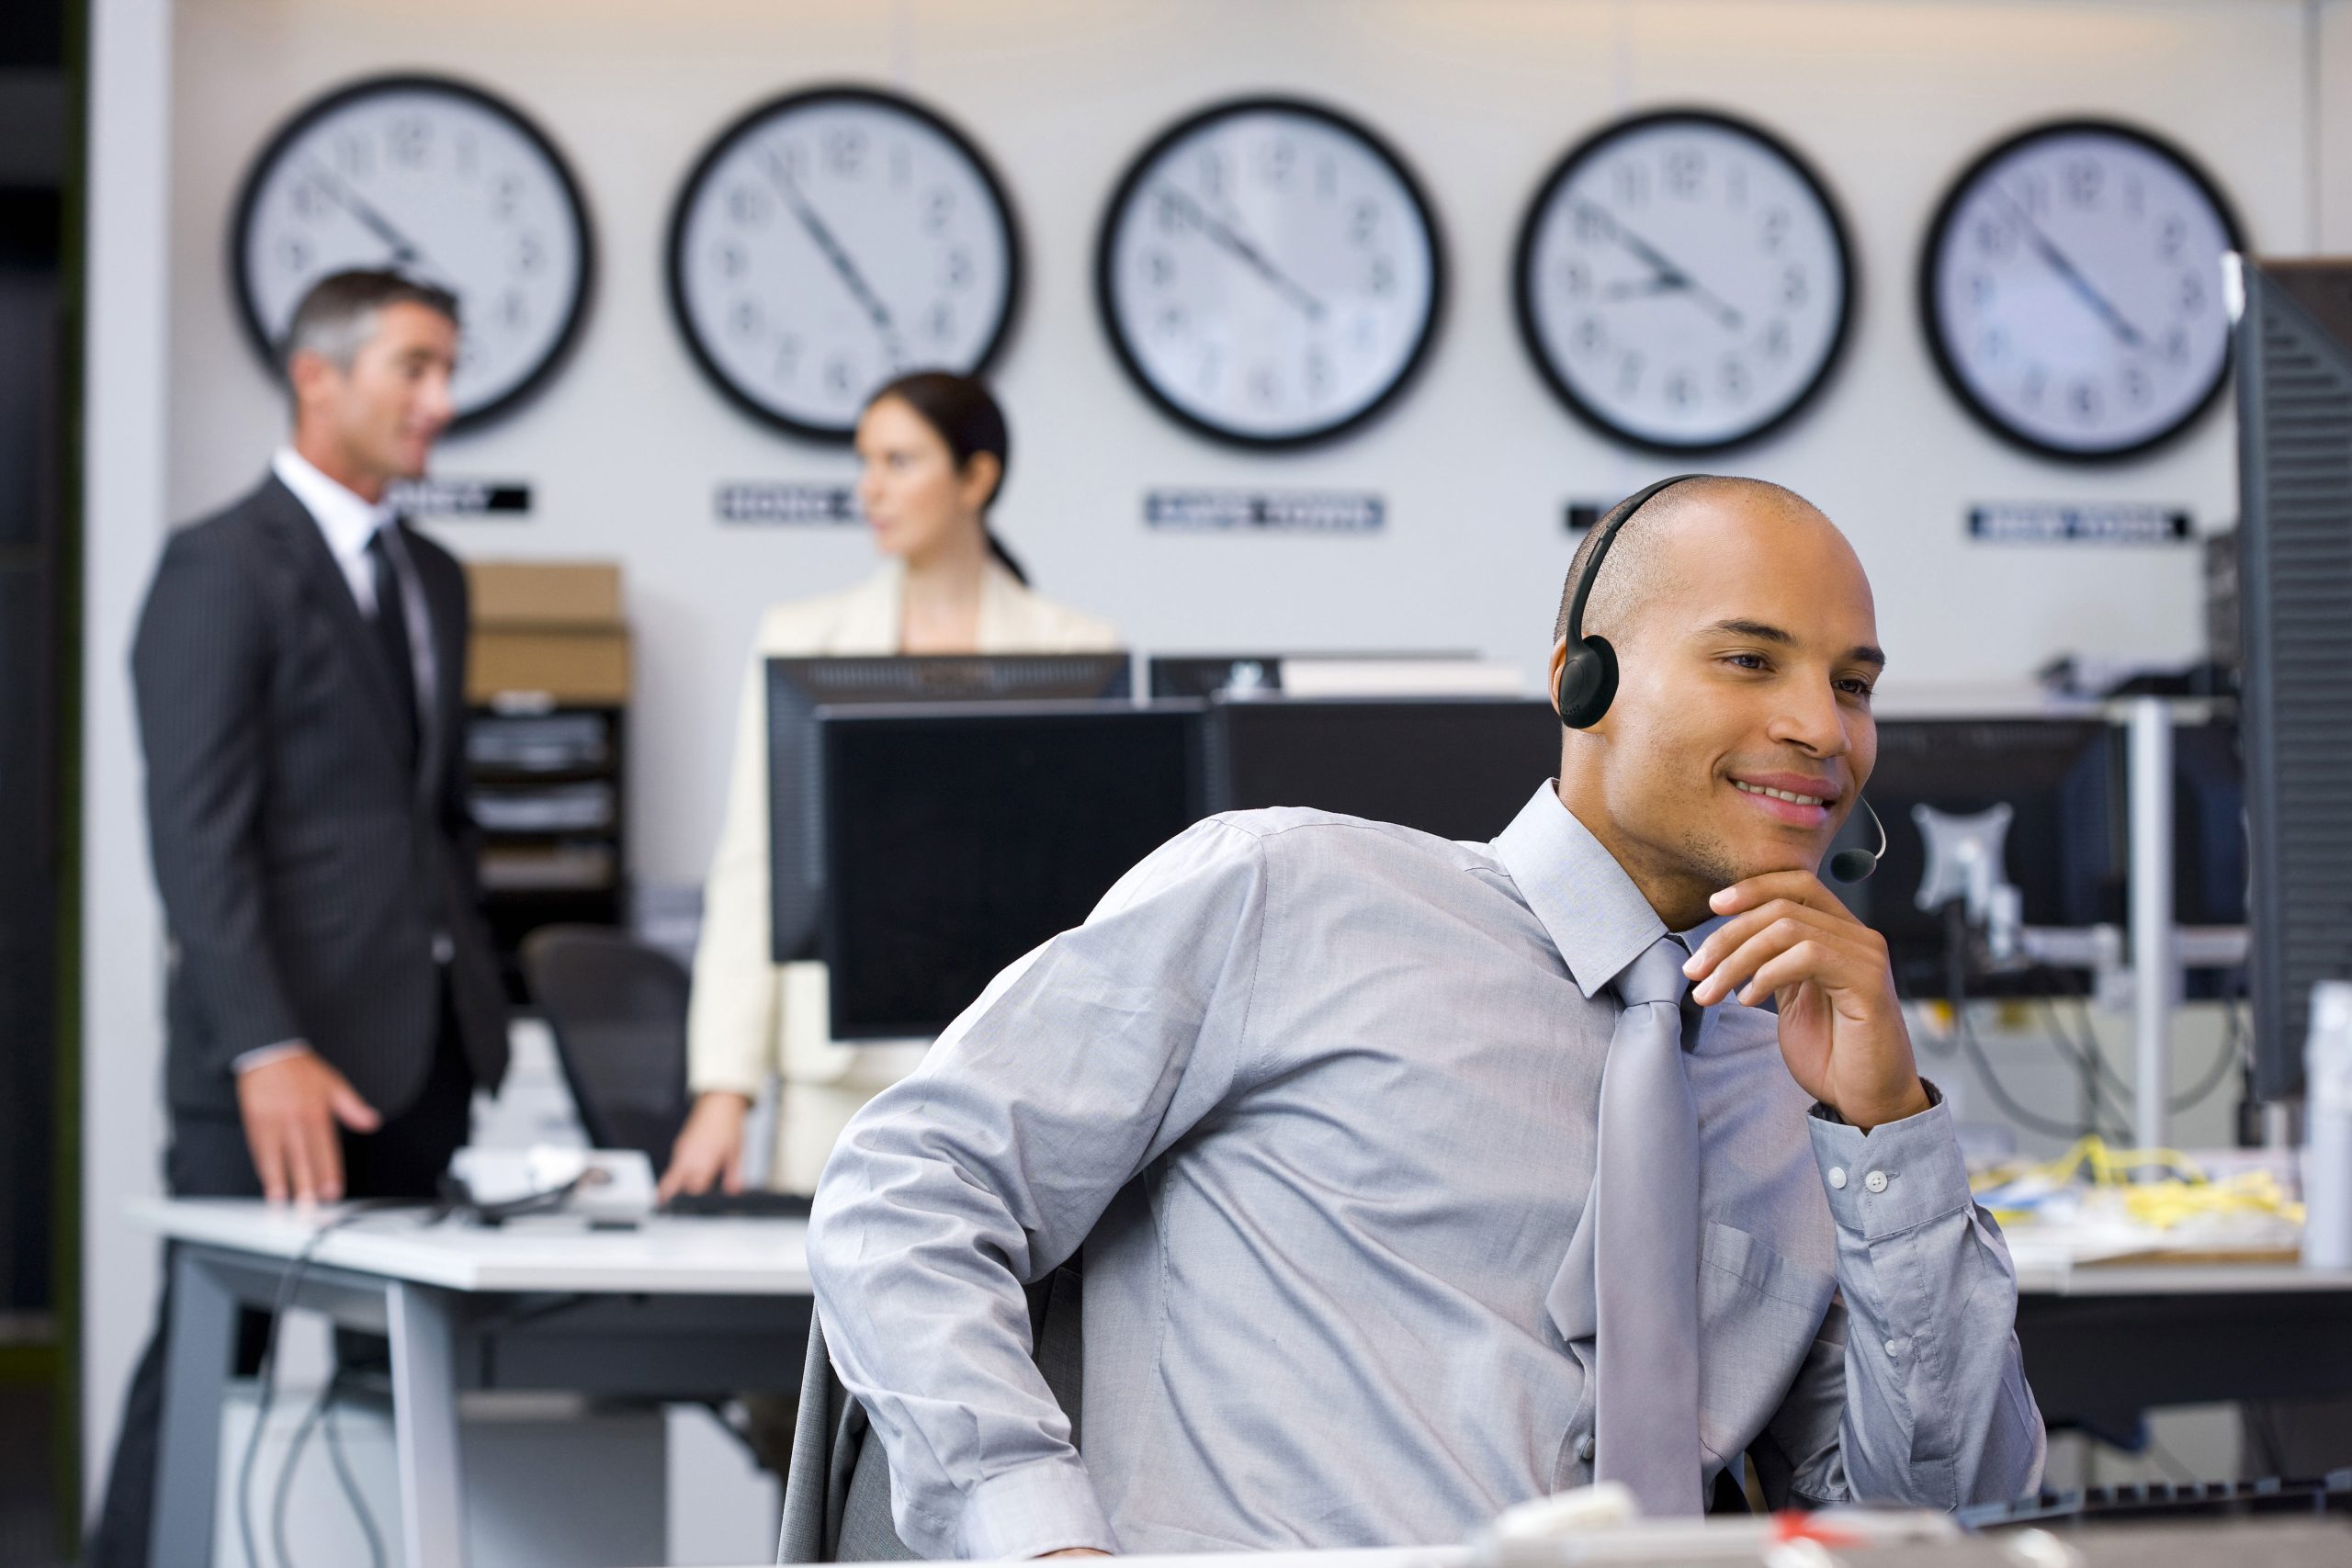 24/7 multilingual call center CX agents in contact center world clocks in bg